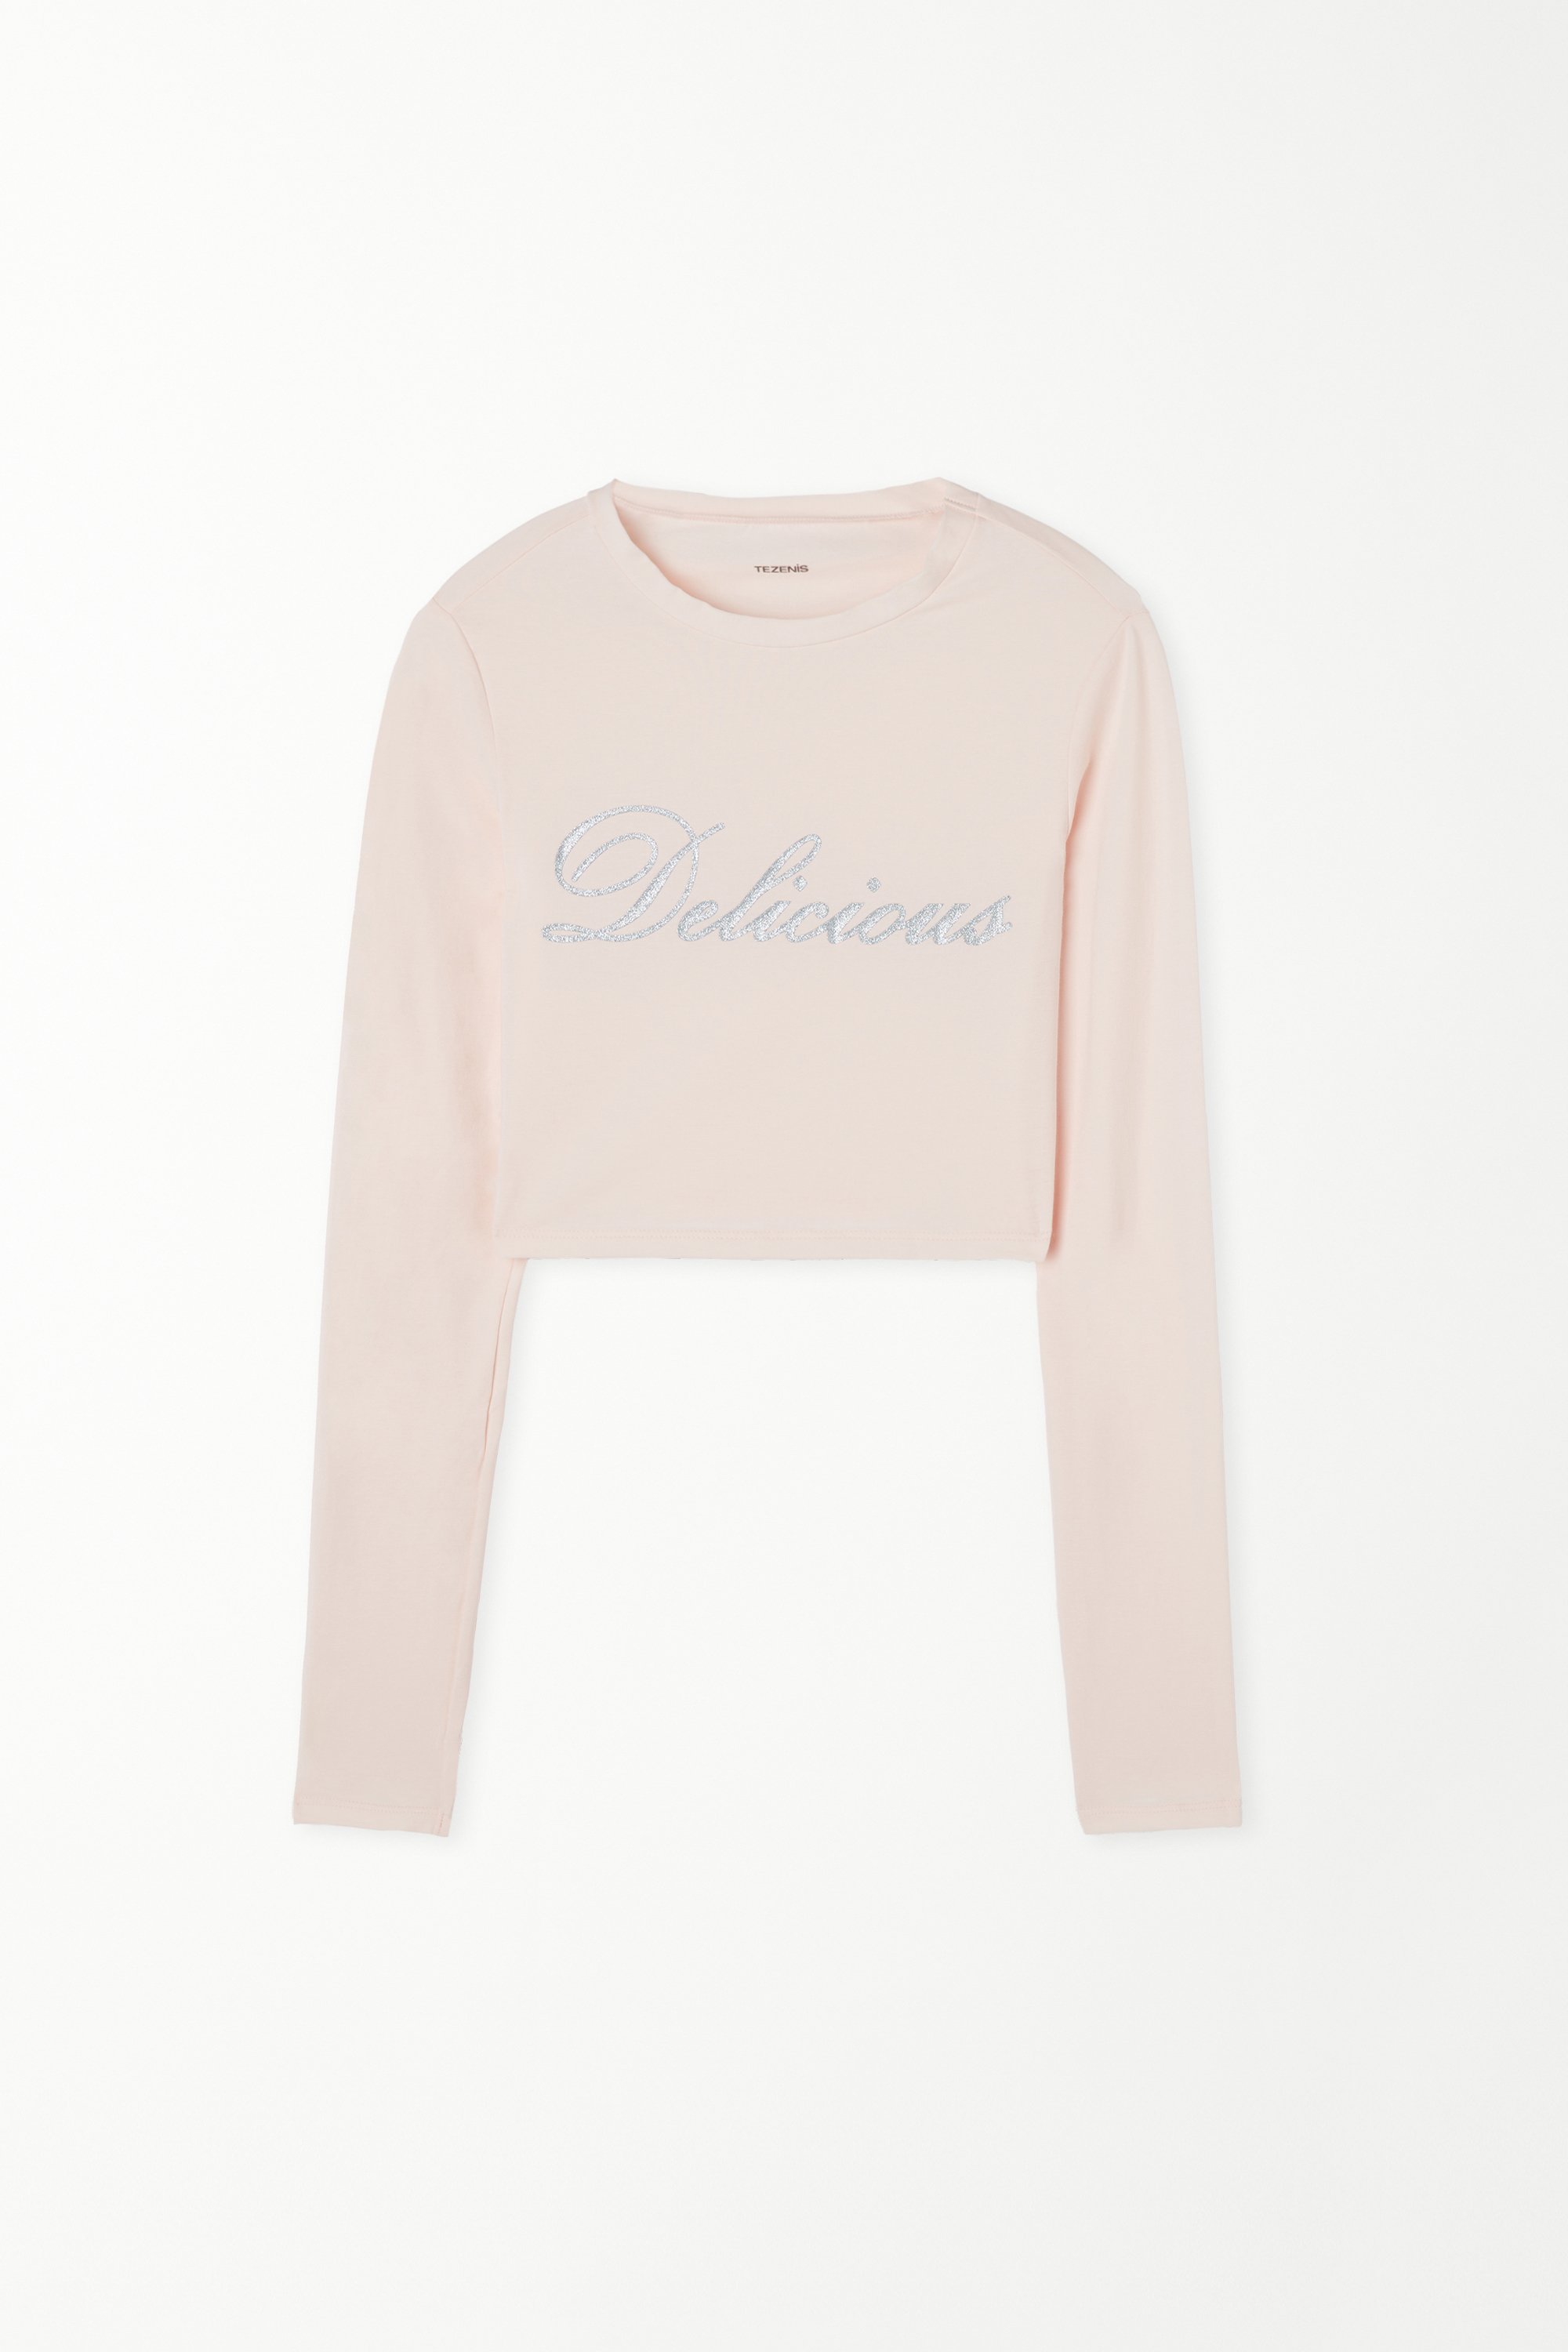 Cropped Long-Sleeved Cotton Top with Writing